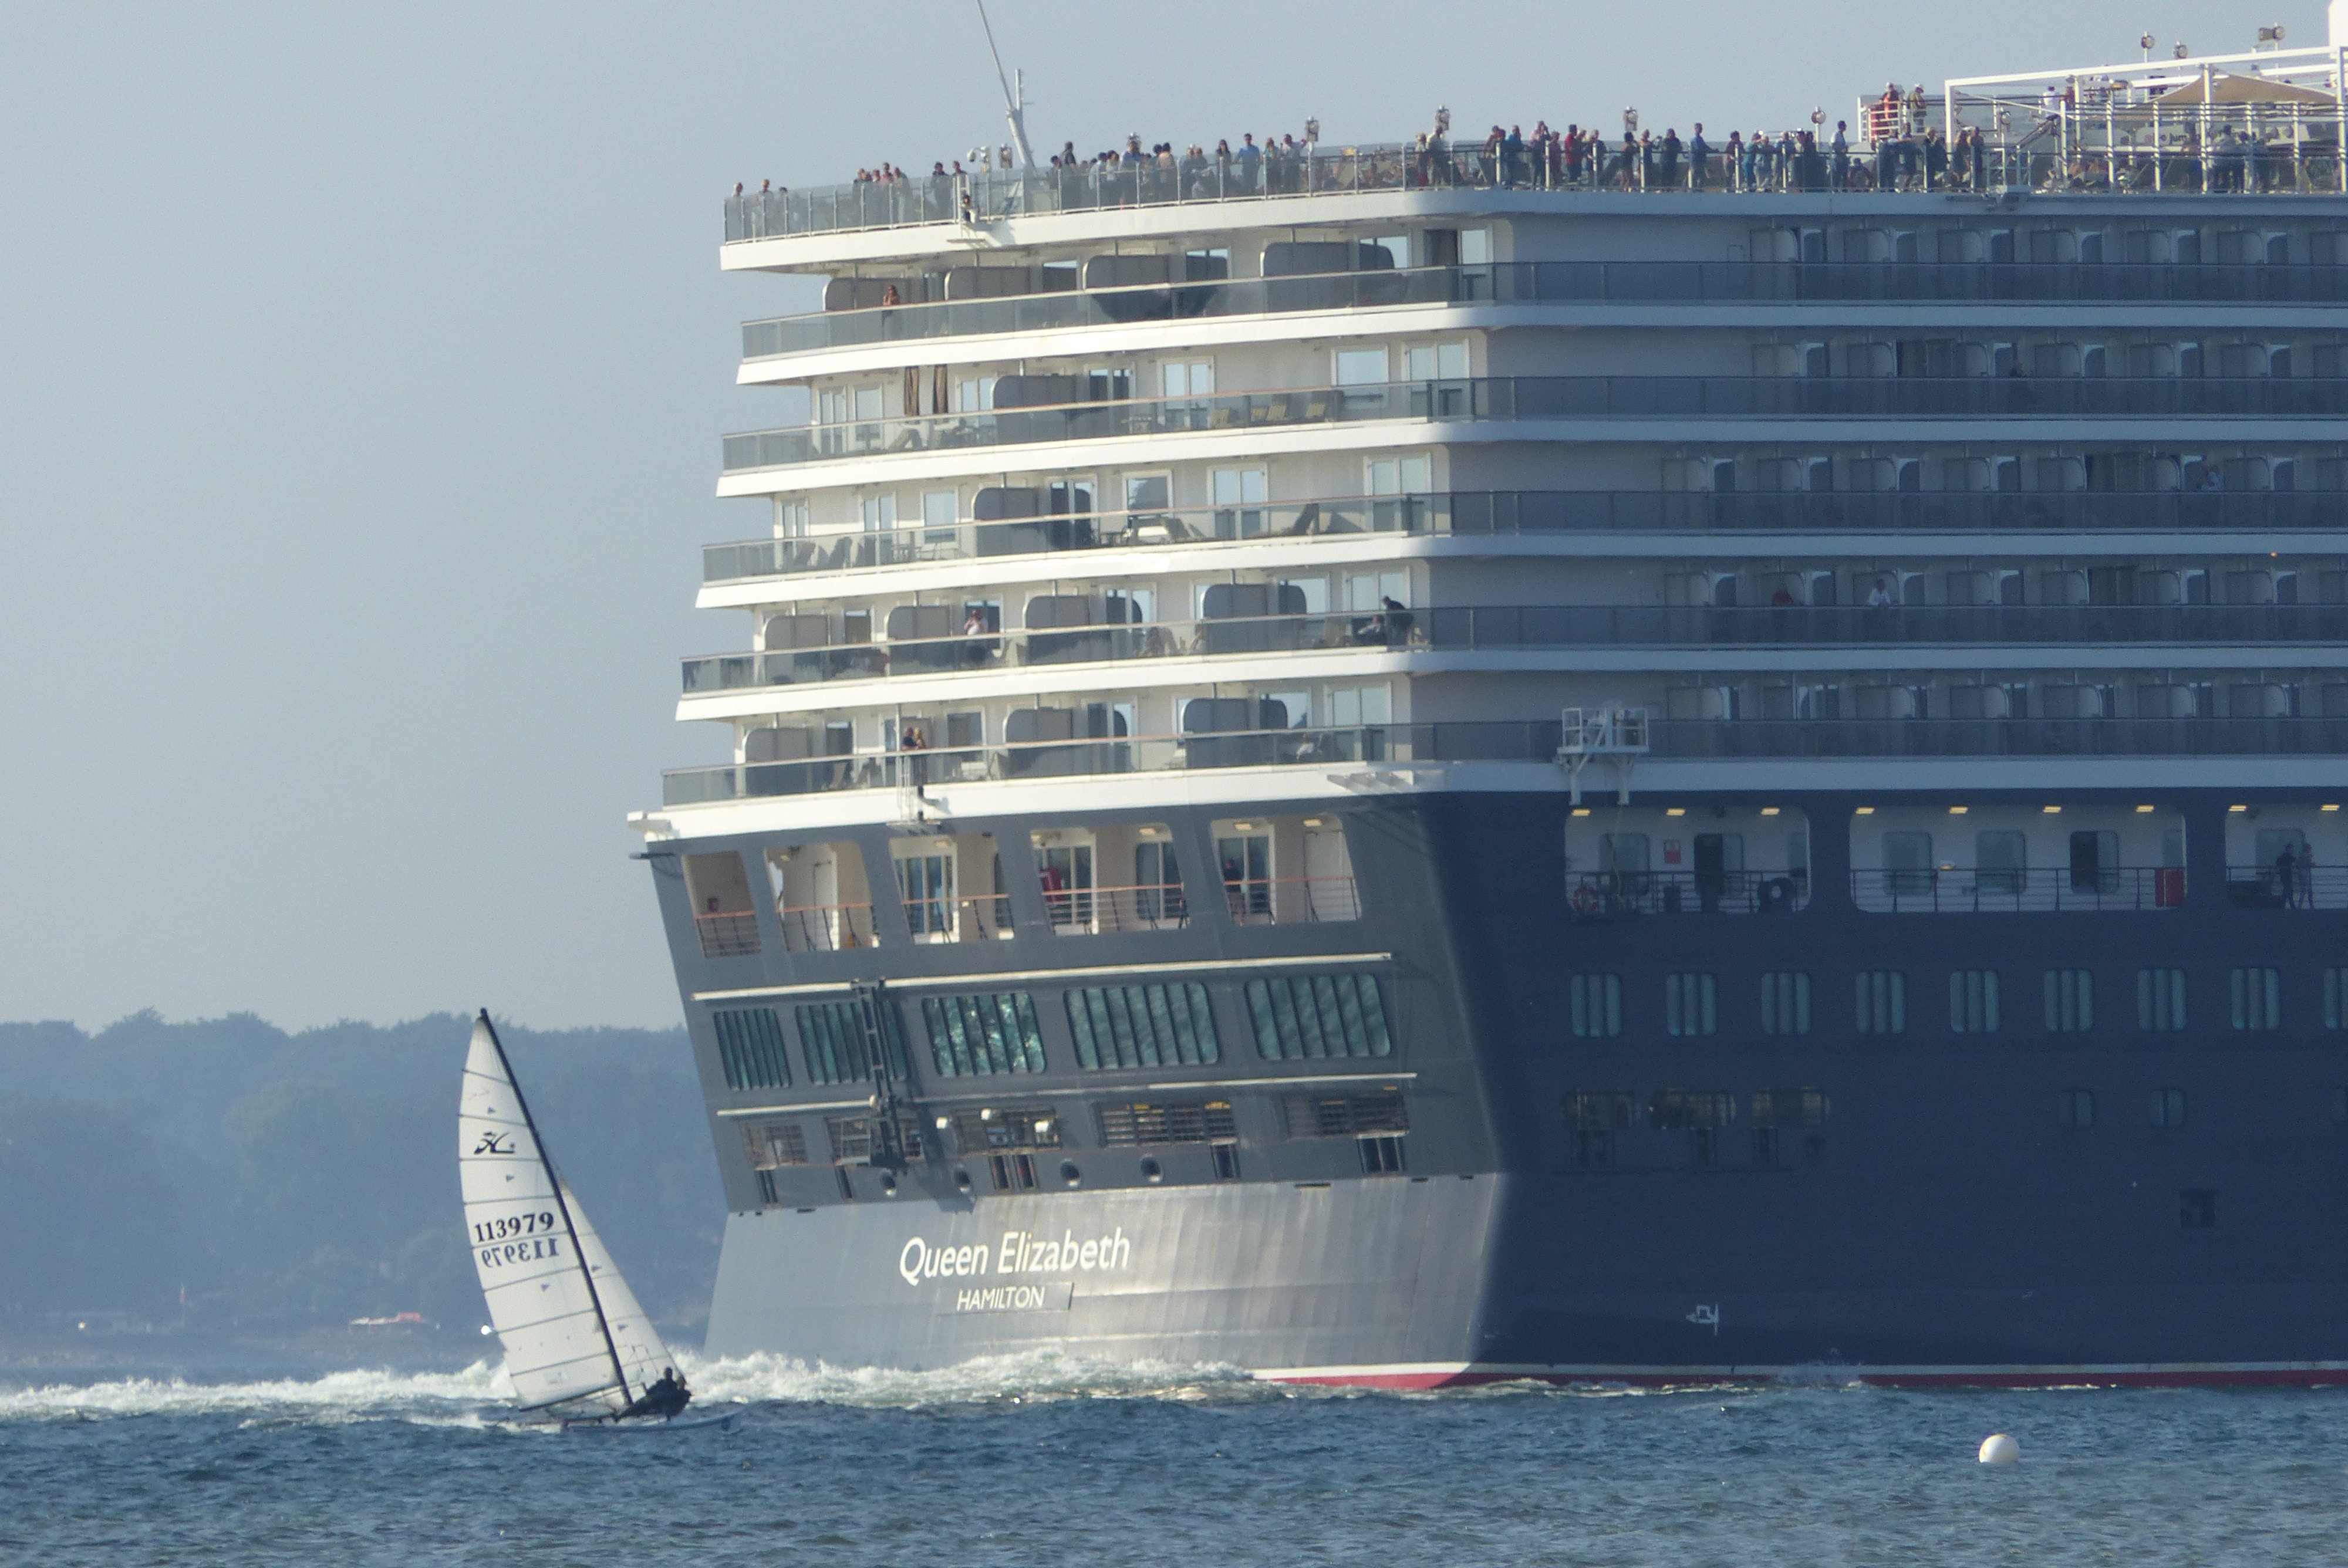 The Queen Elizabeth, a cruise ship the size of an apartment building, is at sea with a small sailboat beside it.